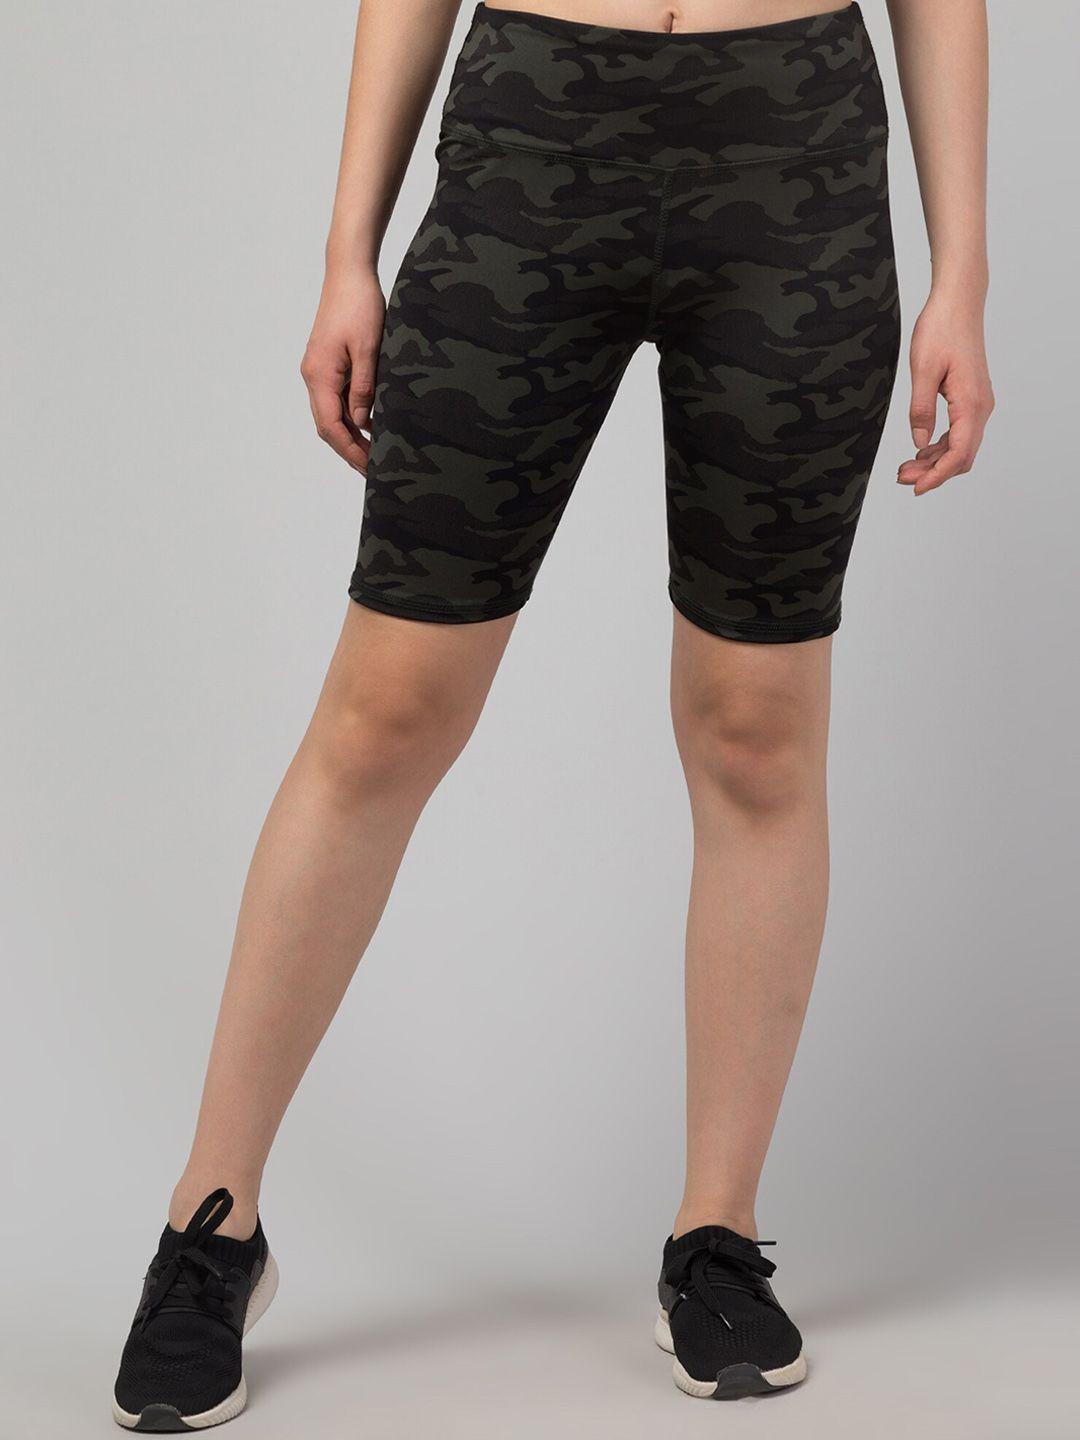 apraa & parma women high-rise camouflage printed skinny fit sports shorts